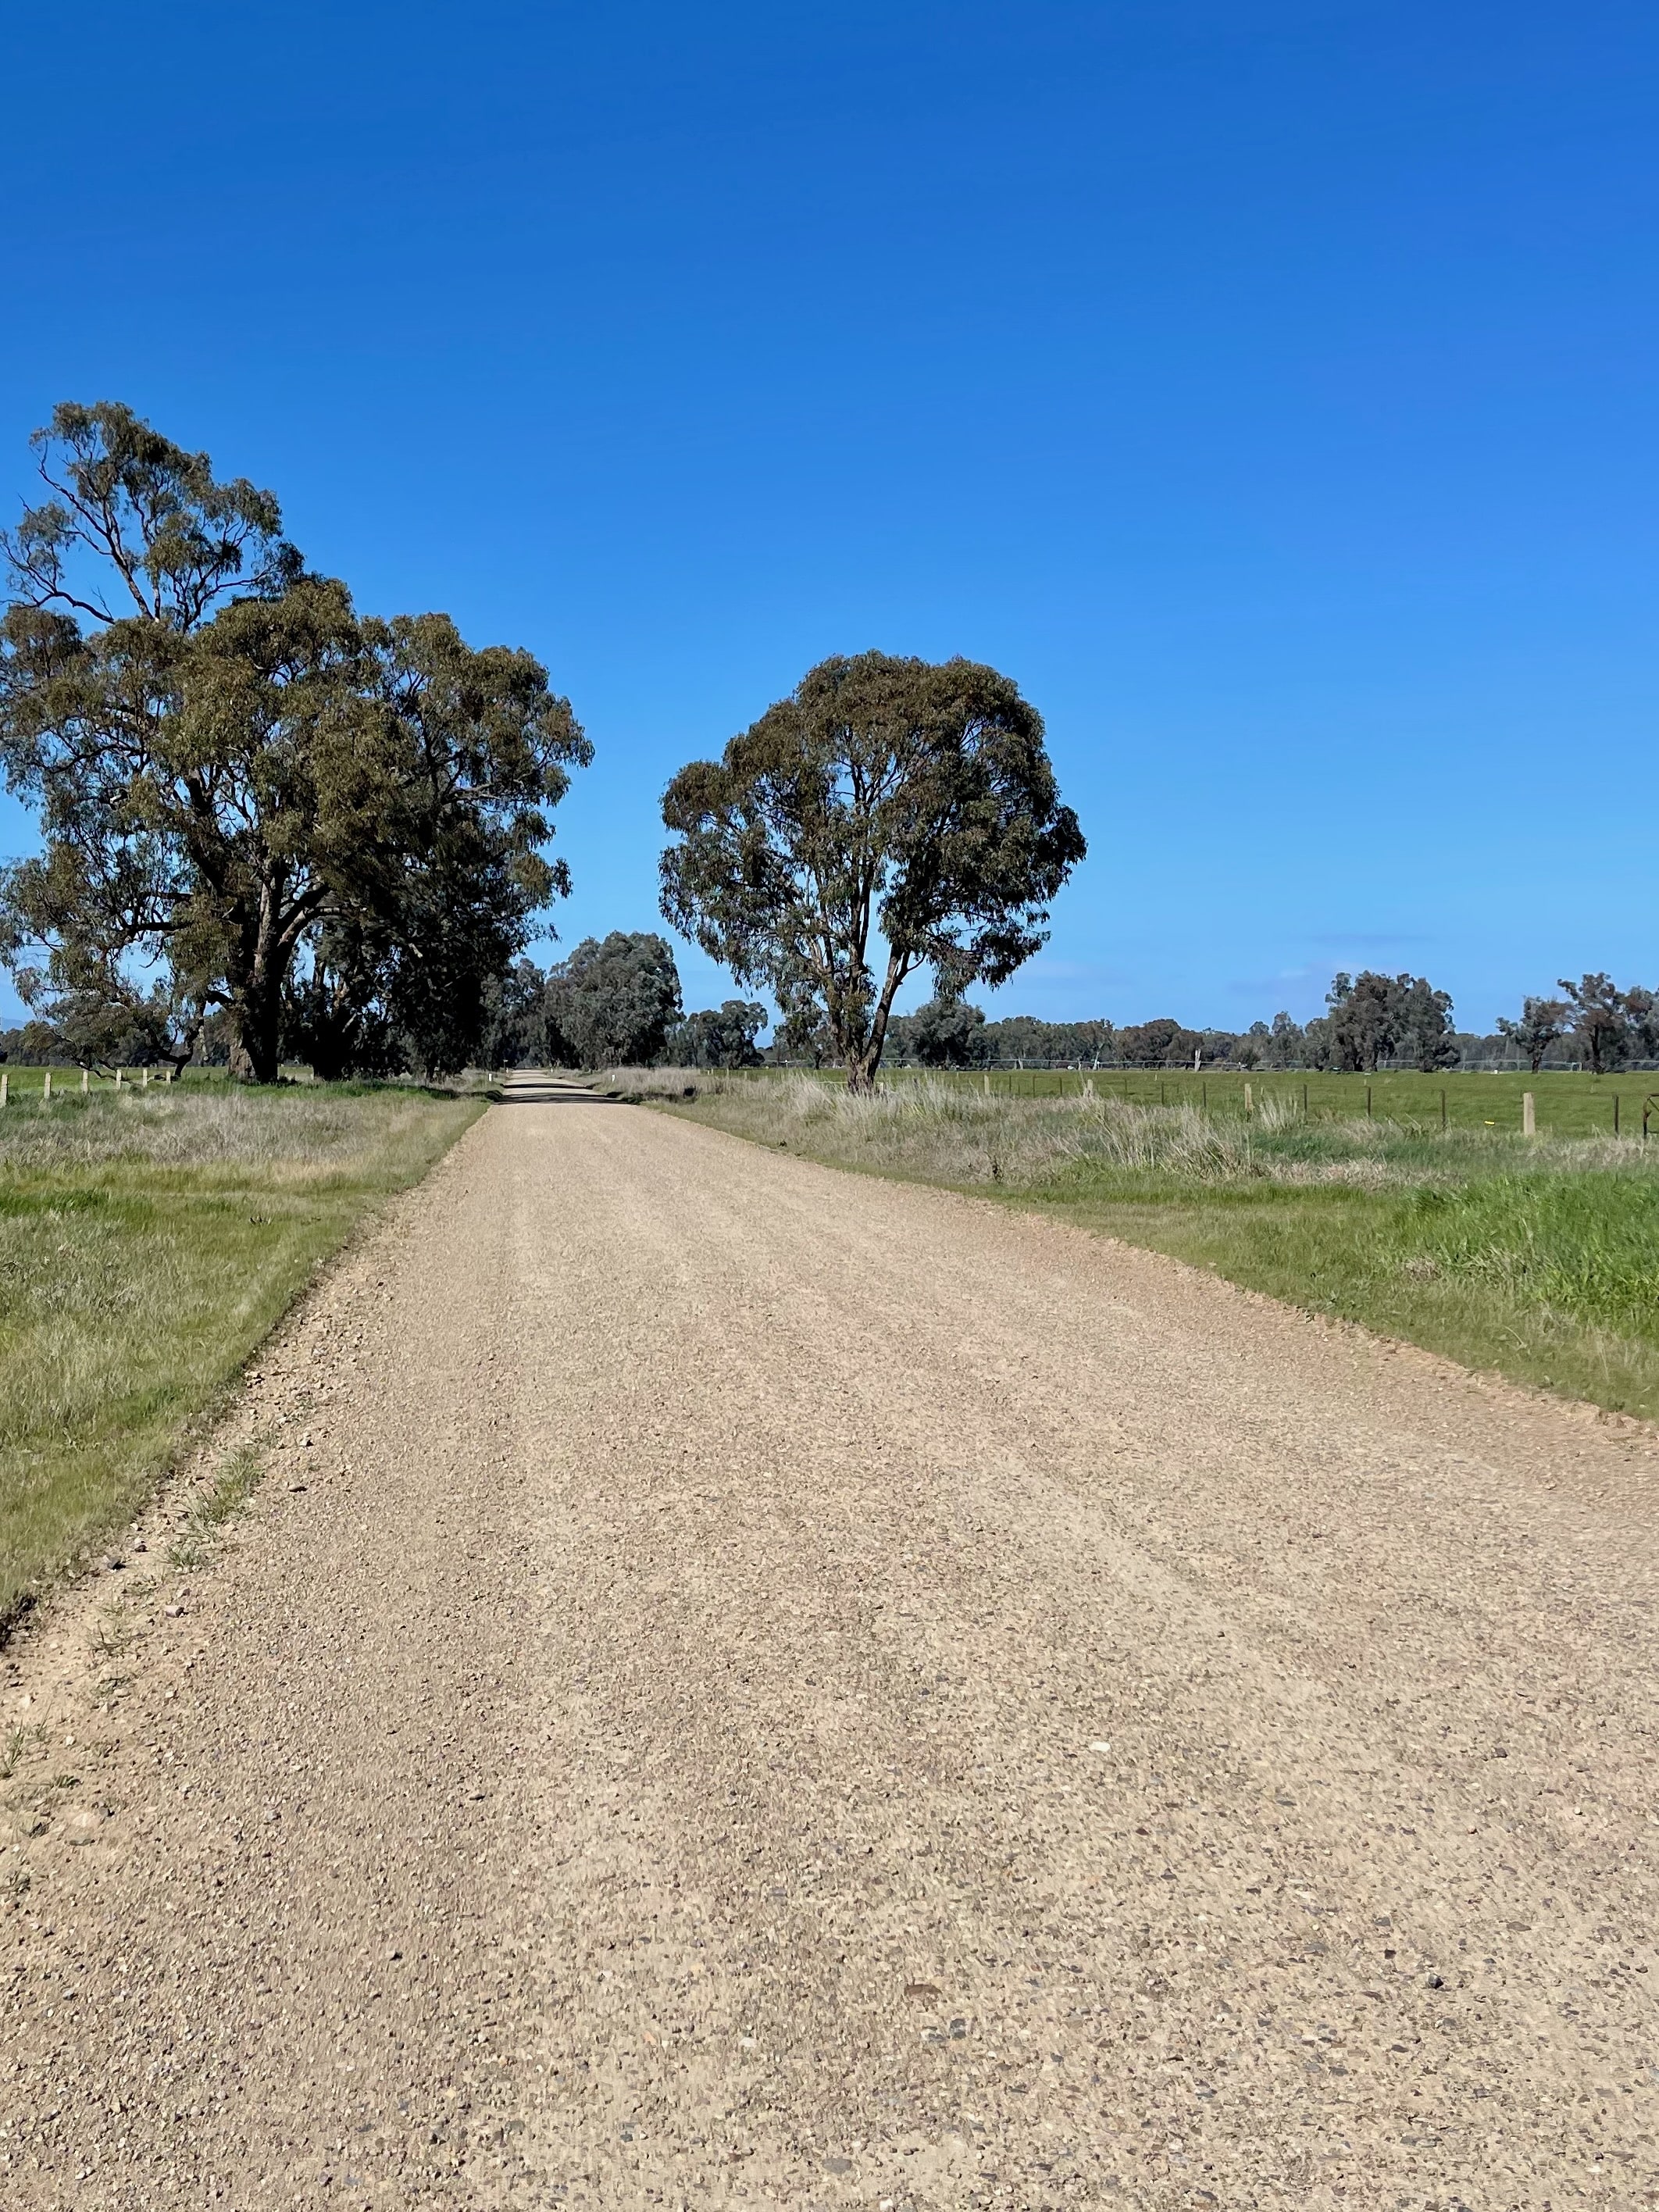 Gravel road with trees lining the road in the distance  on a sunny day